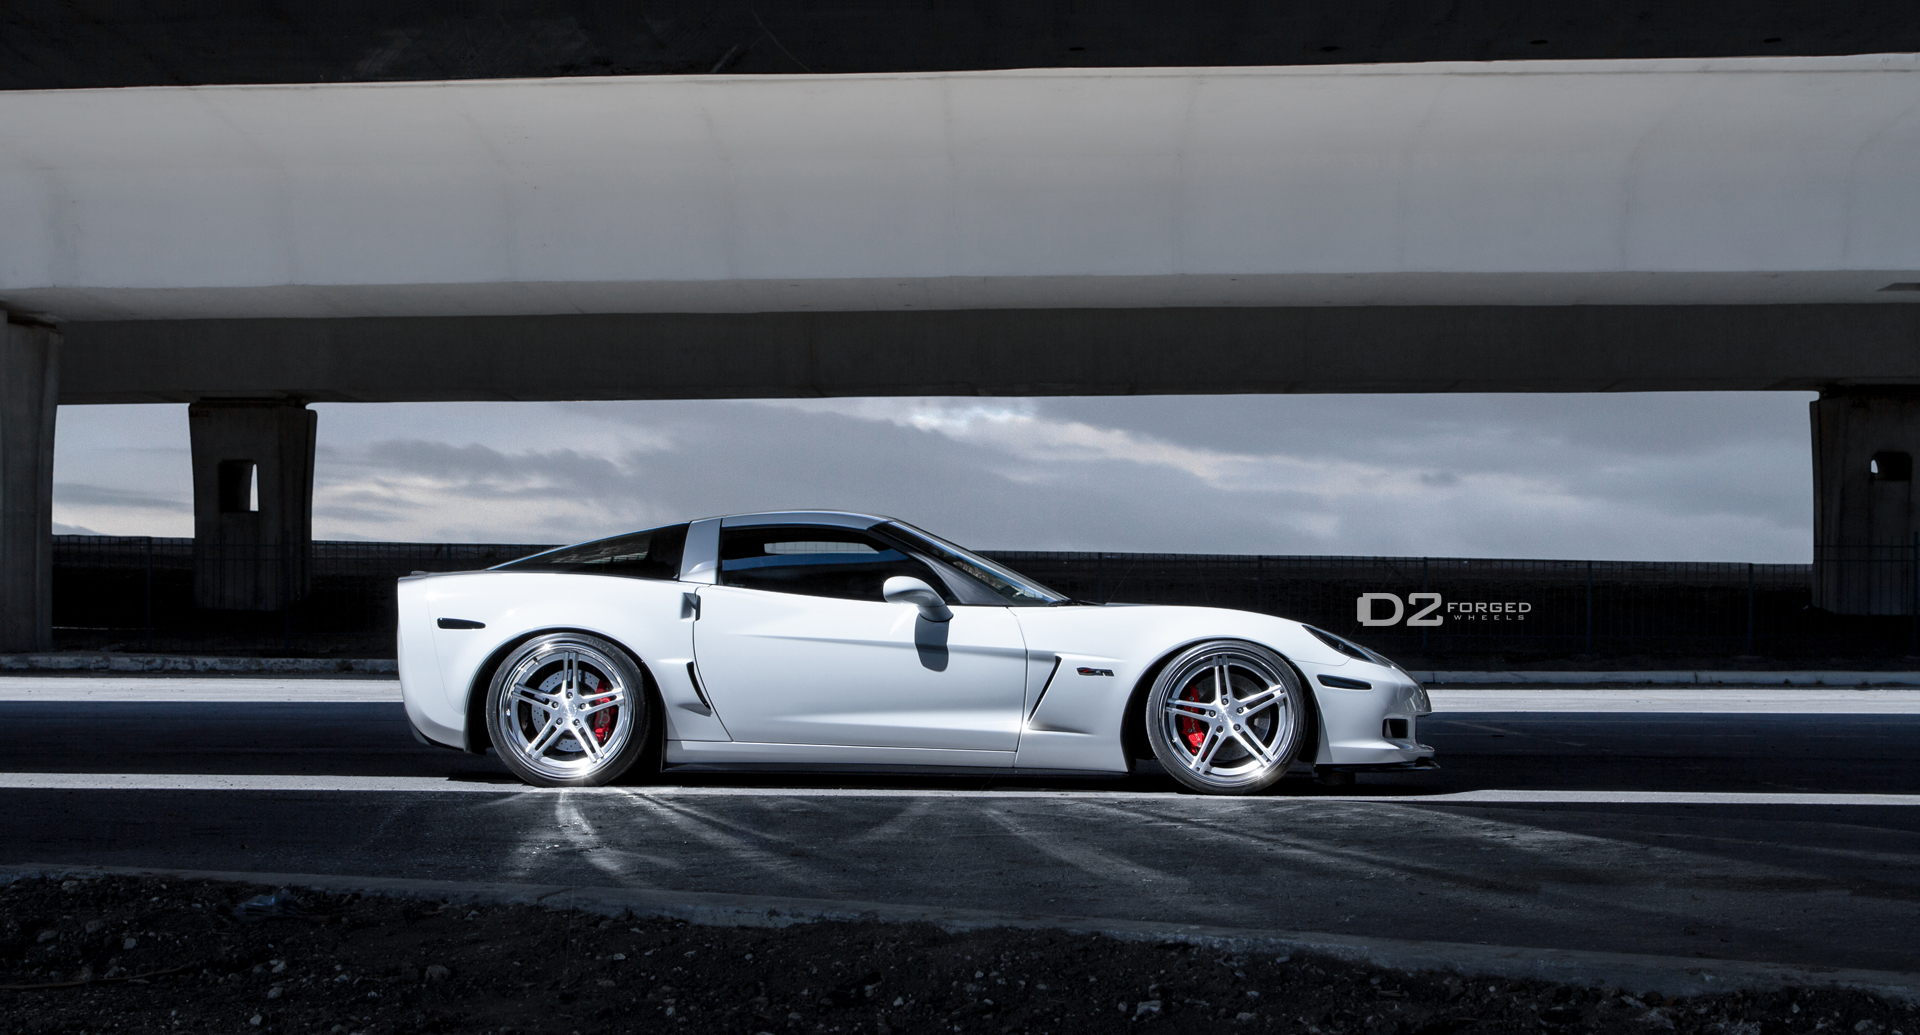 corvette, Z06, Vehicles, Cars, Auto, Chevrolet, Chevy, Supercar, Tuning, Wheels, Exotic, Muscle Wallpaper